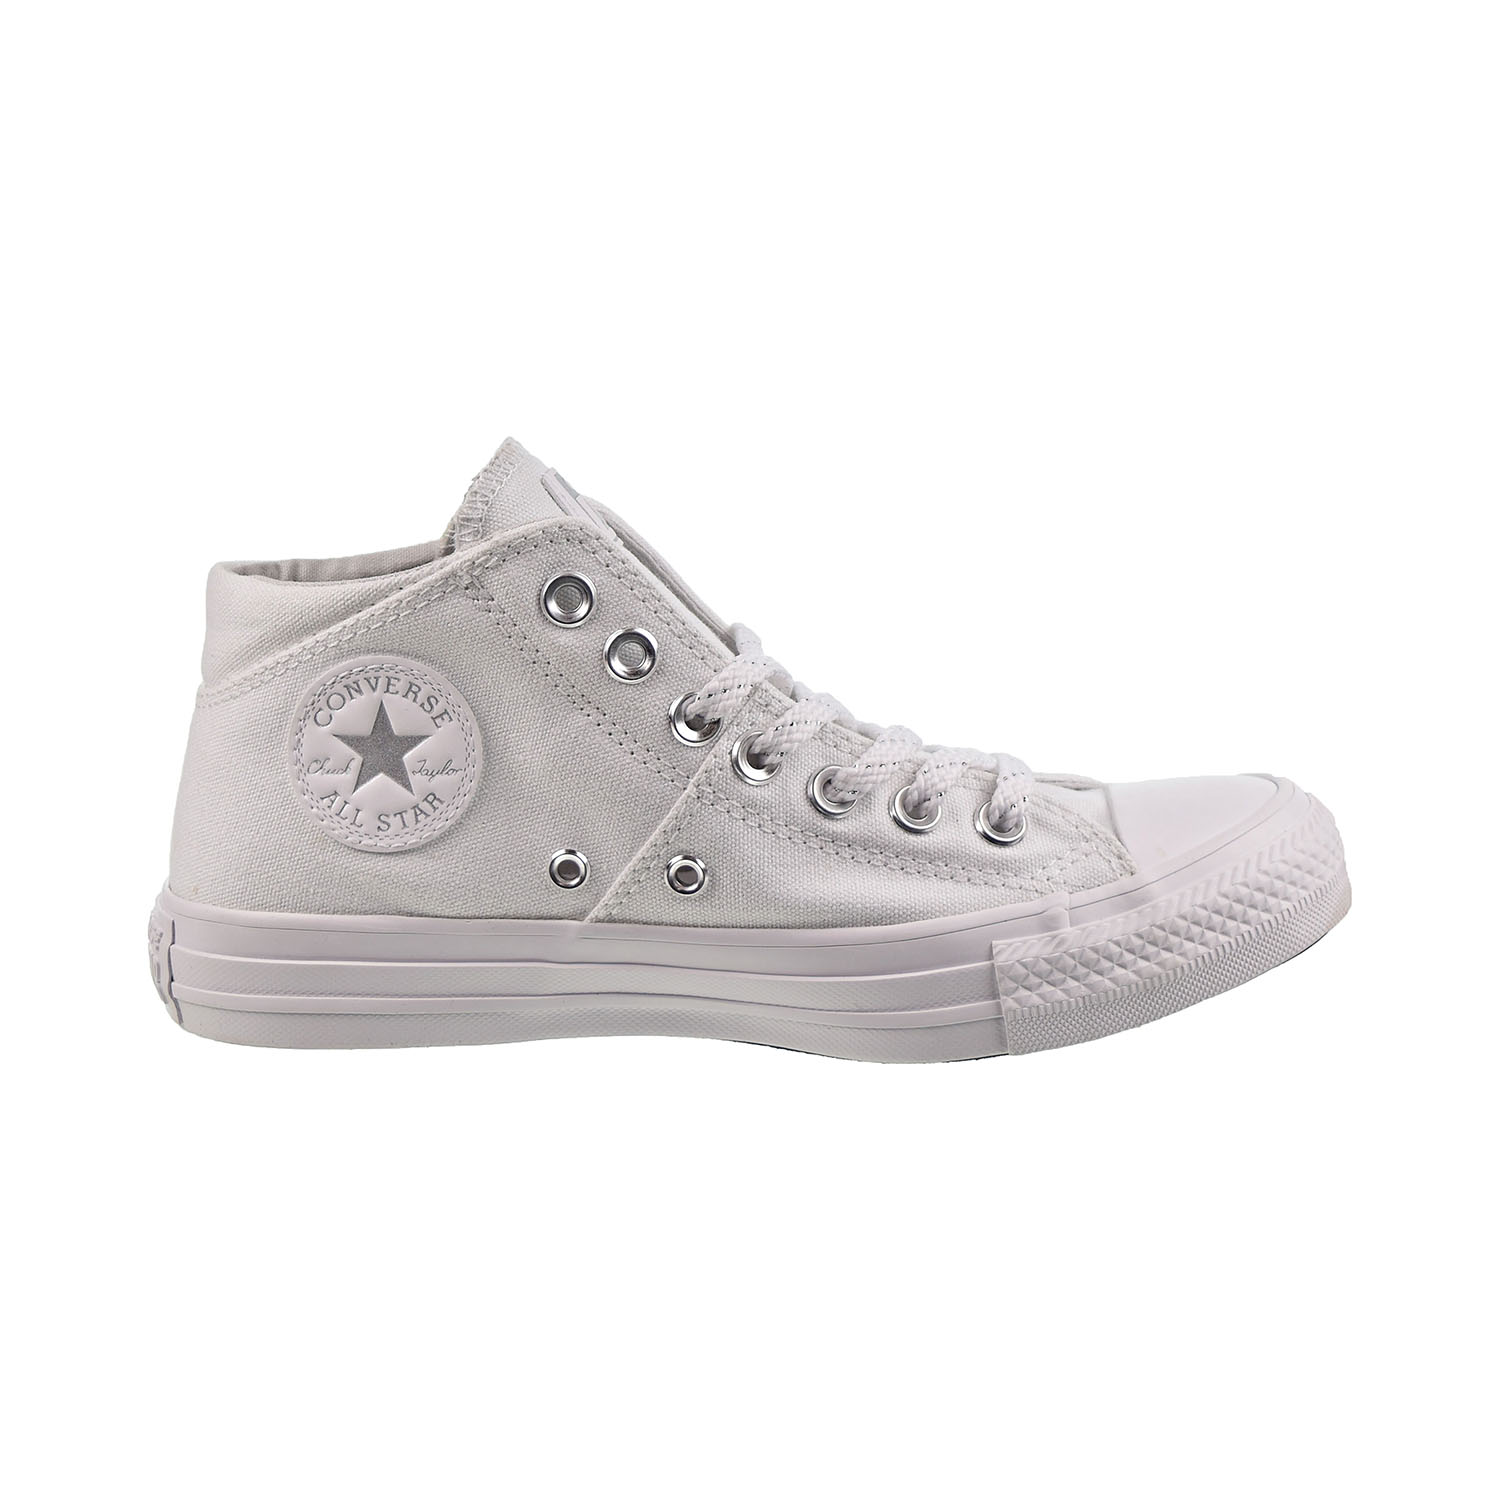 sneaker chuck taylor all star madison